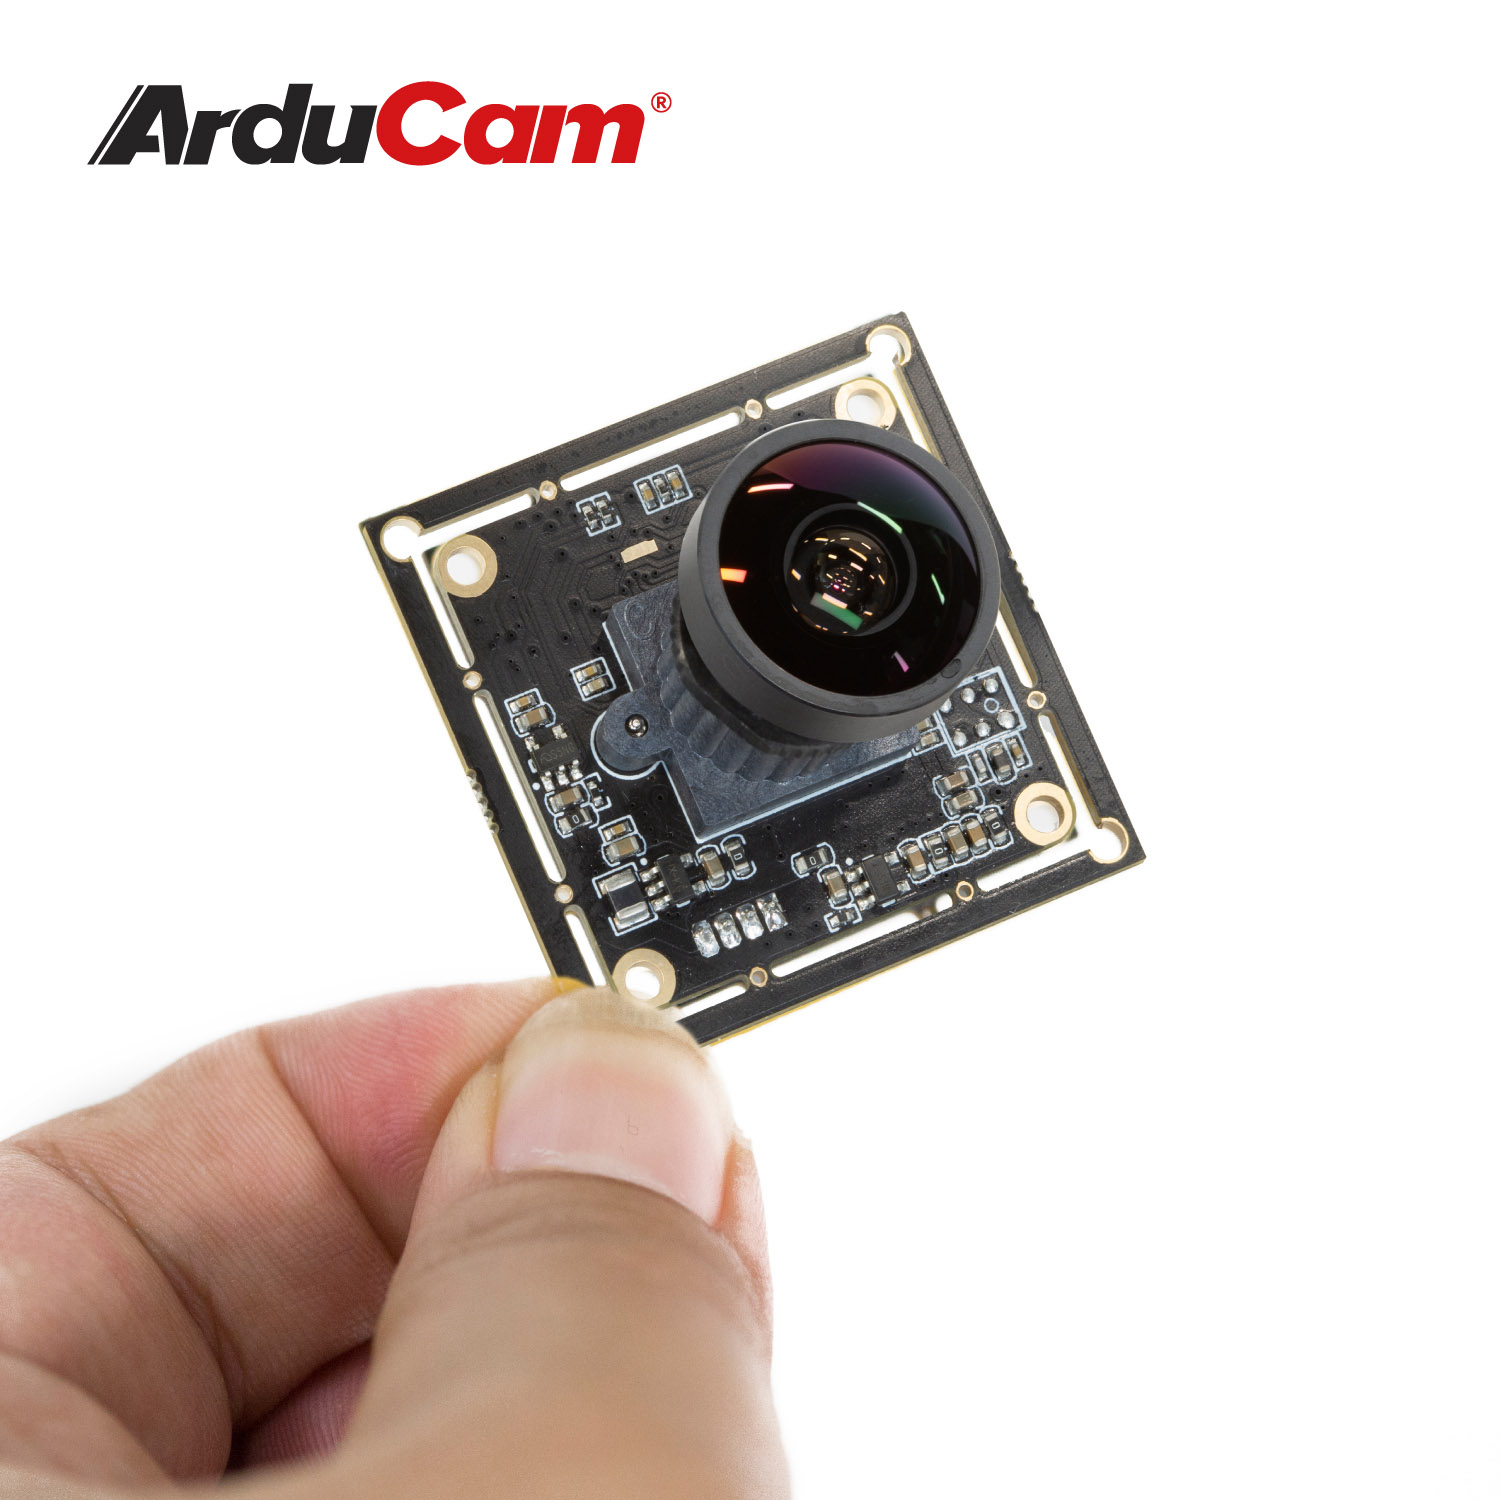 Arducam Fisheye Low Light Camera for Computer, 2MP IMX291 Wide Angle Mini UVC Video Camera Board with Microphone - Arducam